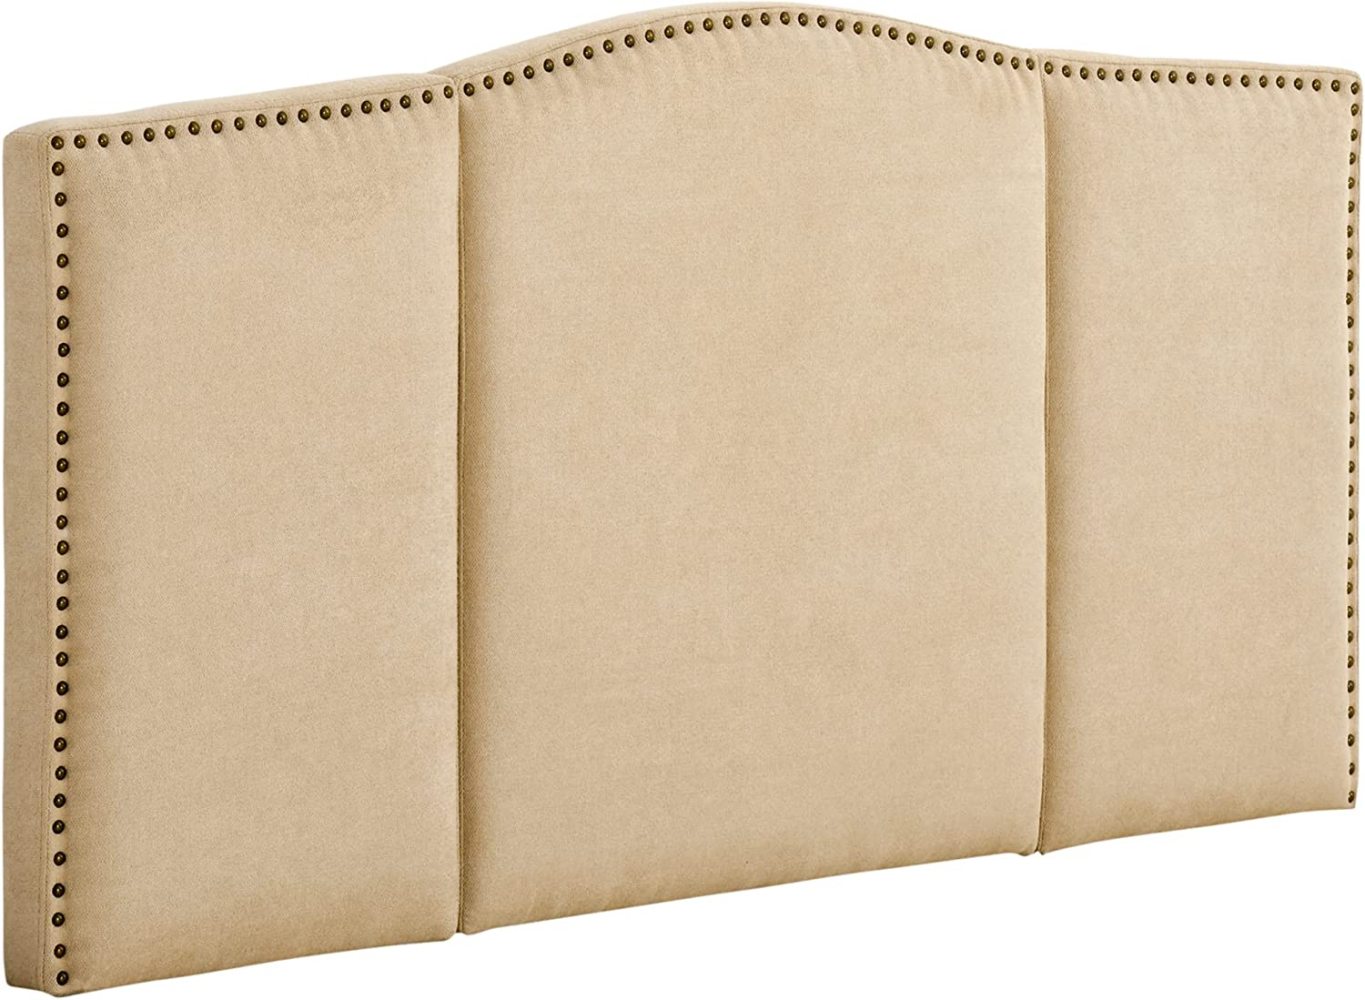 LueInJoy Upholstered Nailhead Trim Headboard Home Bedroom Decoration for Full and Queen-Sized Beds Beige - image 1 of 3